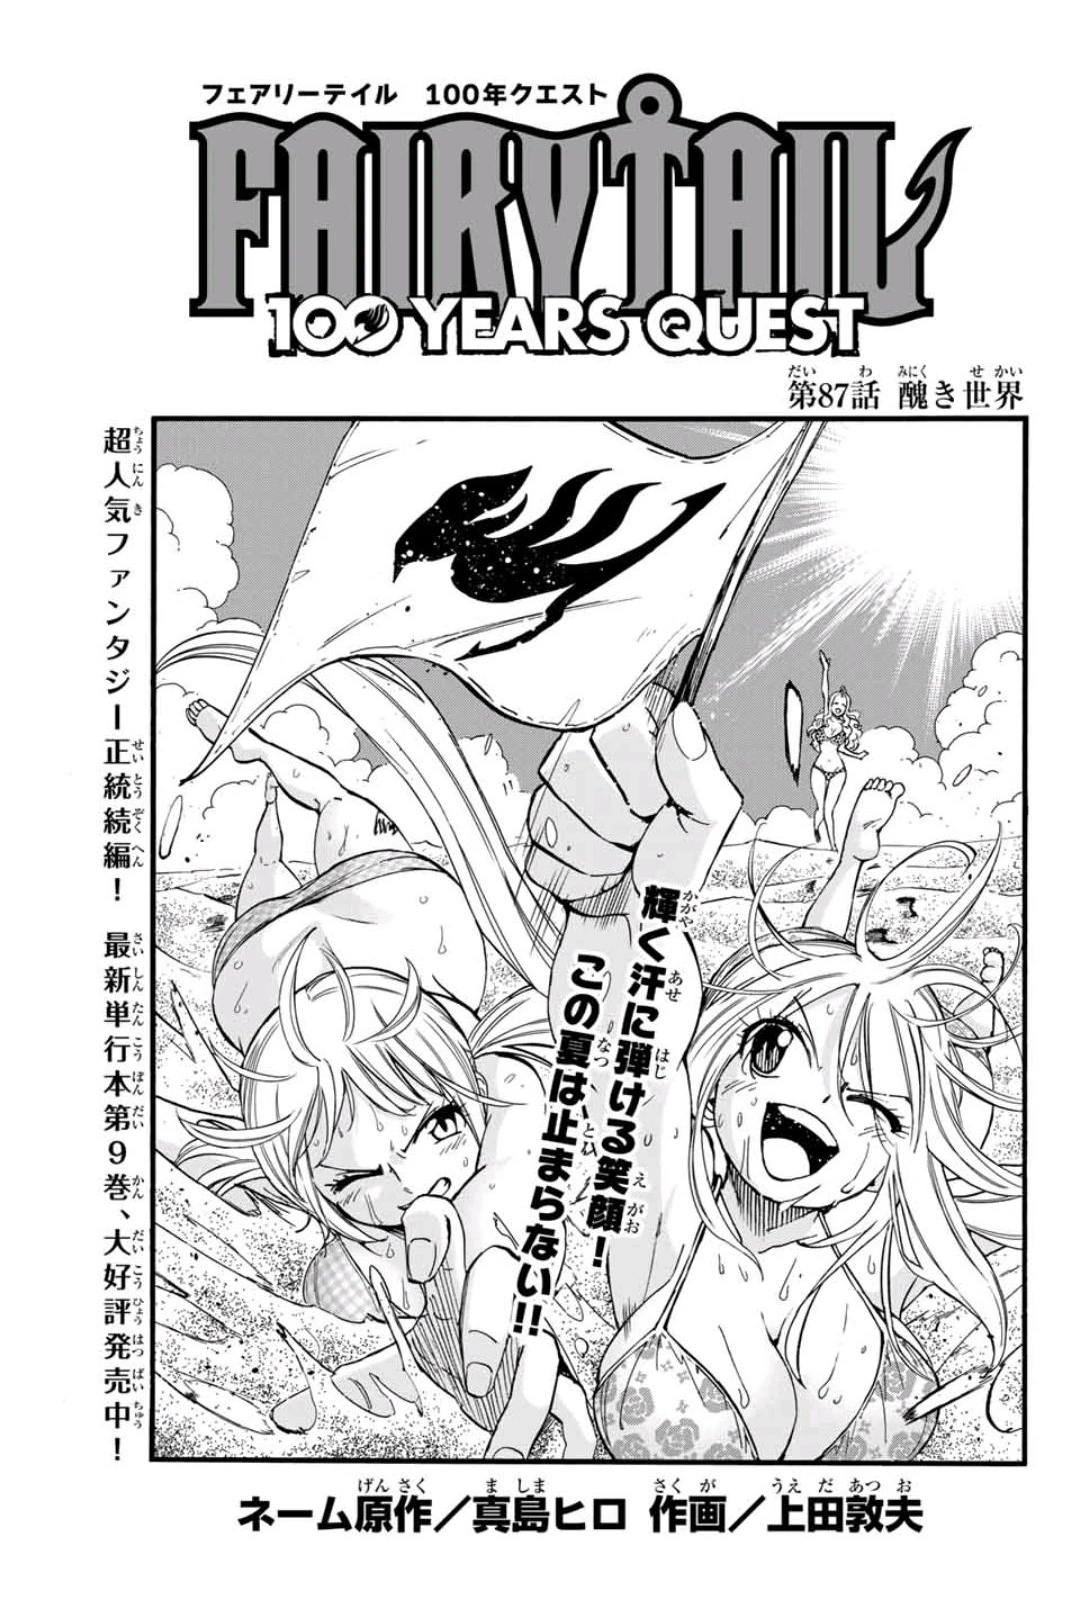 Latest Spoilers For Fairy Tail 100 Years Quest Chapter 109 Raw Scans Released Online Dc News